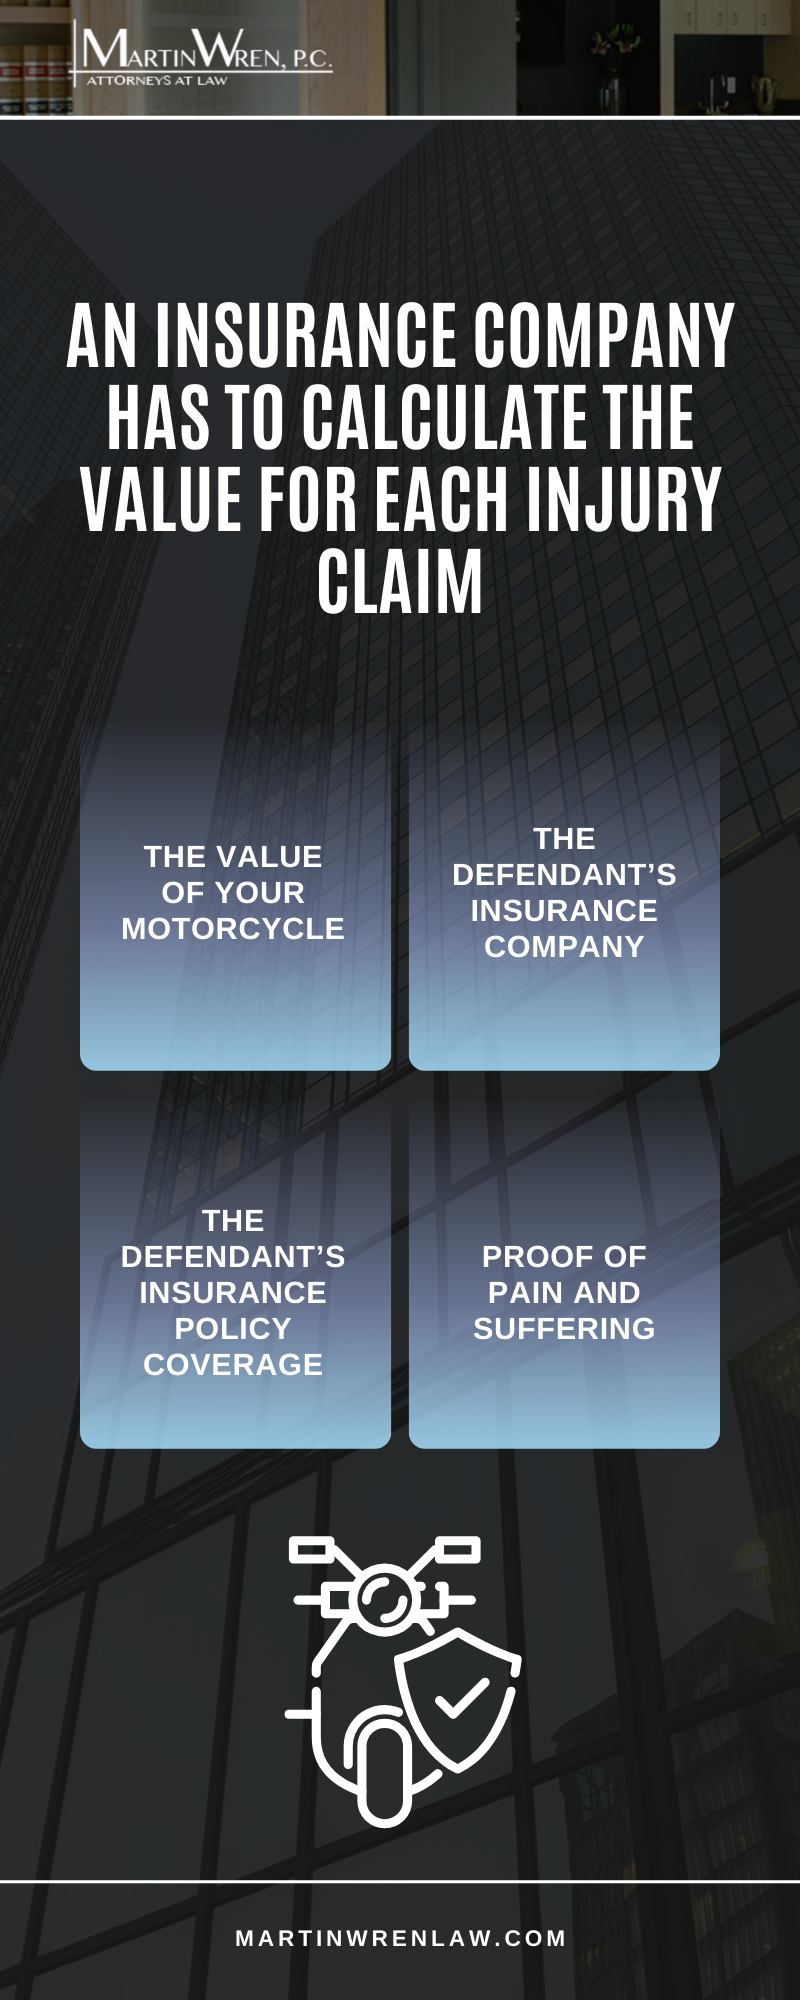 An Insurance Company Has To Calculate The Value For Each Injury Claim Infographic